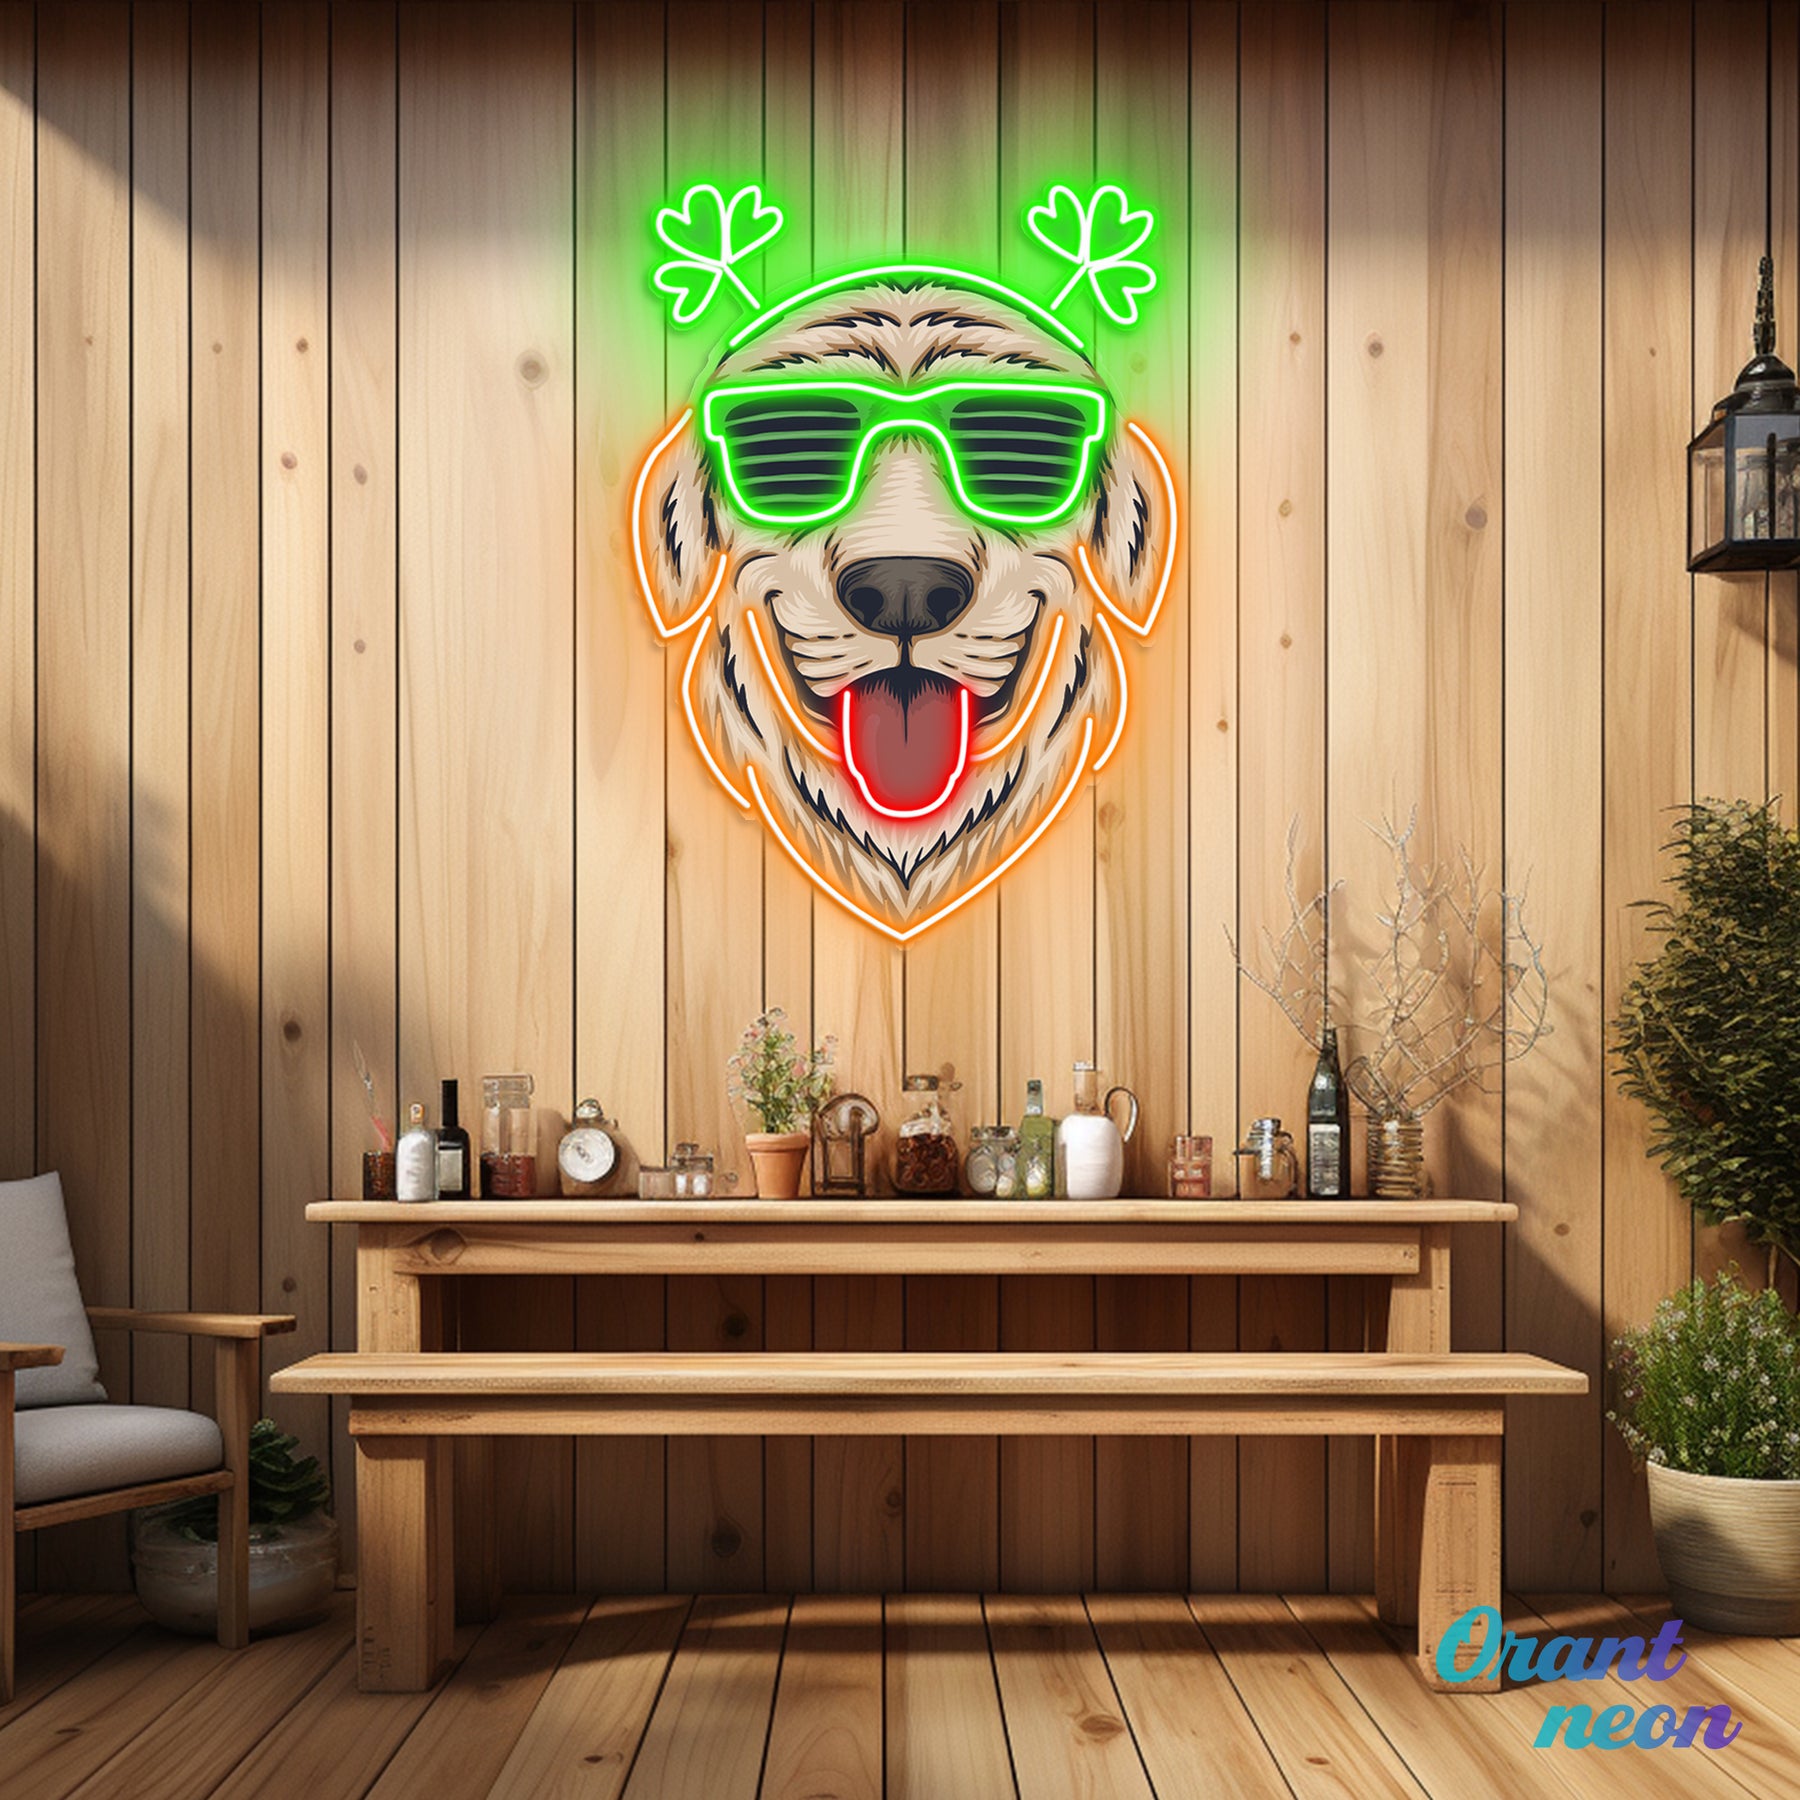 Patrick's Day Cool Dog Wearing Glasses and Smile Led Neon Acrylic Artwork